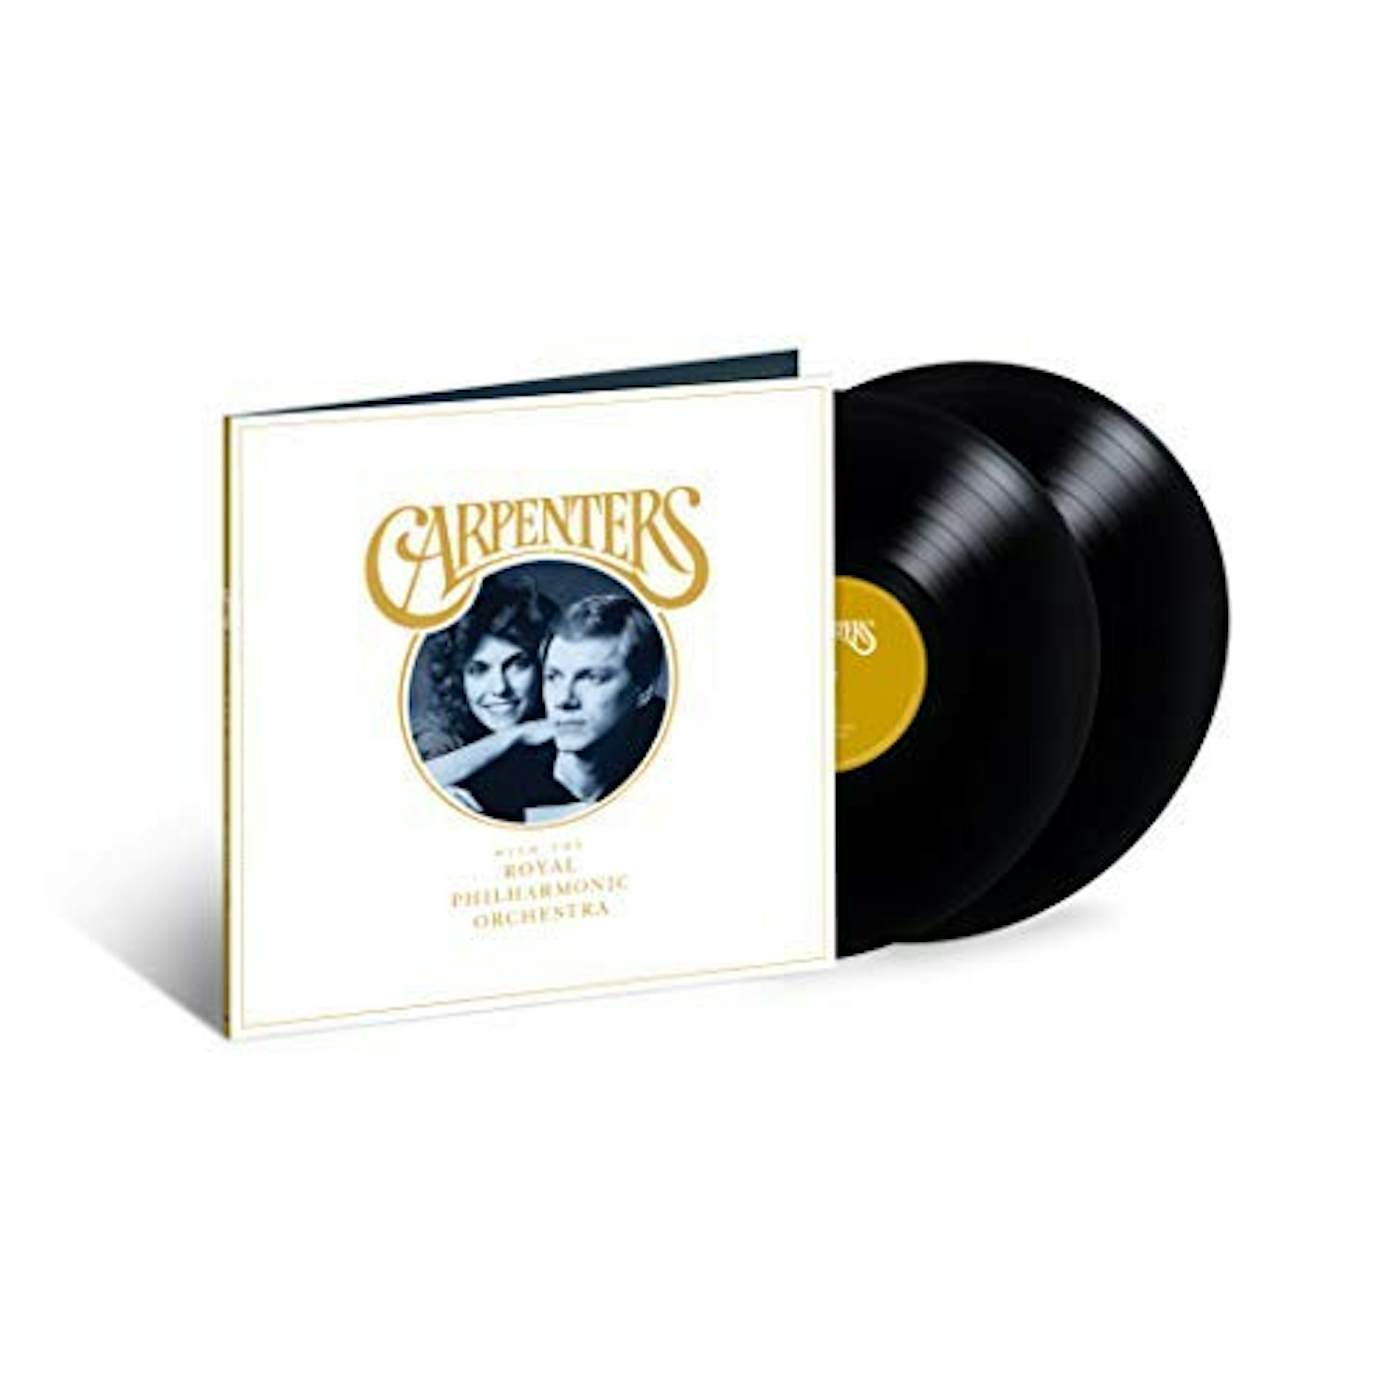 Carpenters With The Royal Philharmonic Orchestra Vinyl Record